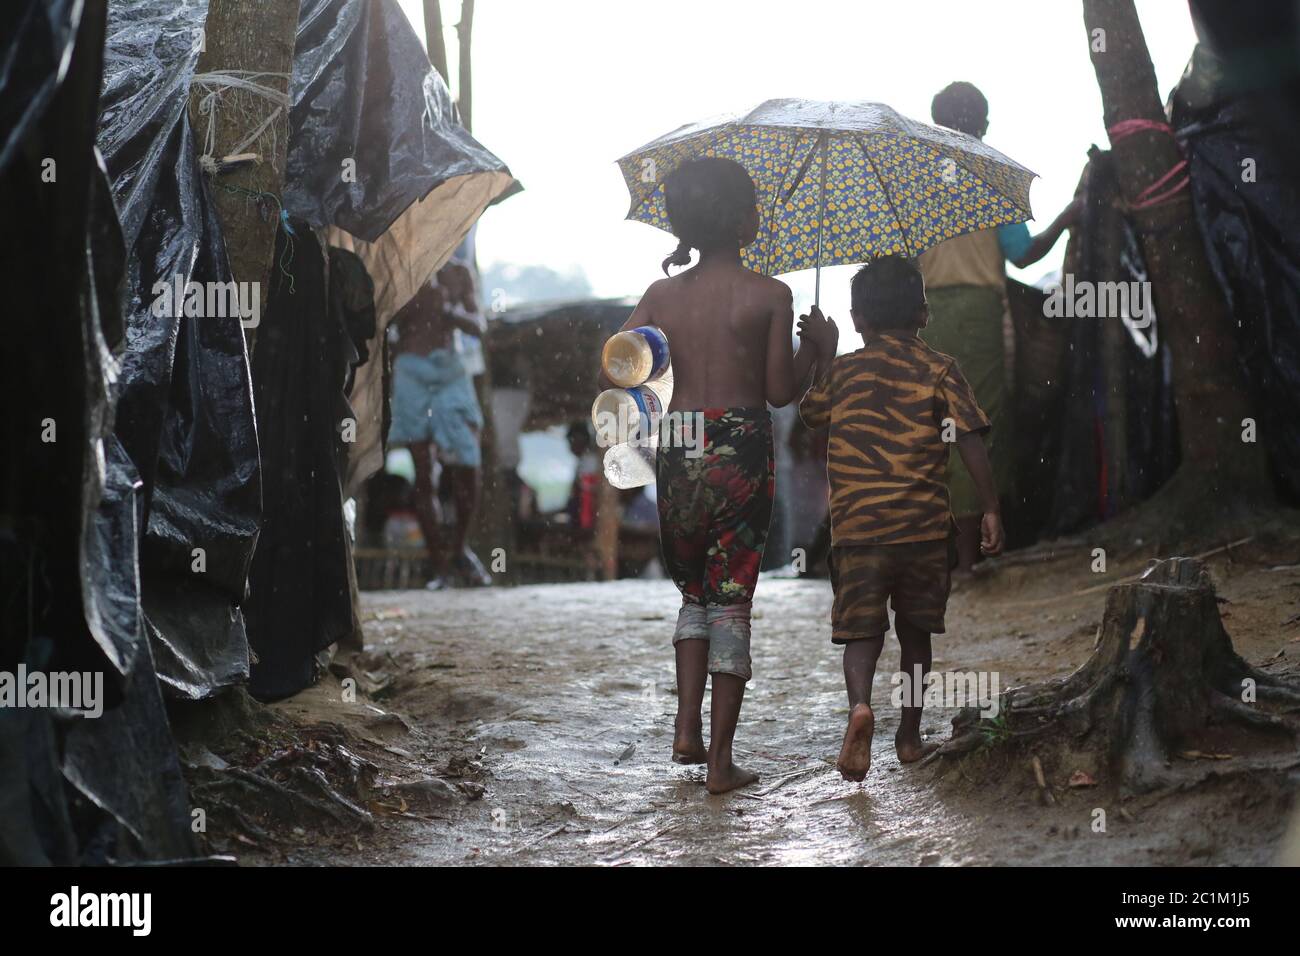 A Rohingya refugee child going to collect drinking water at Kutupalong refugee camp, Bangladesh, Tuesday, Oct. 03, 2017. Stock Photo